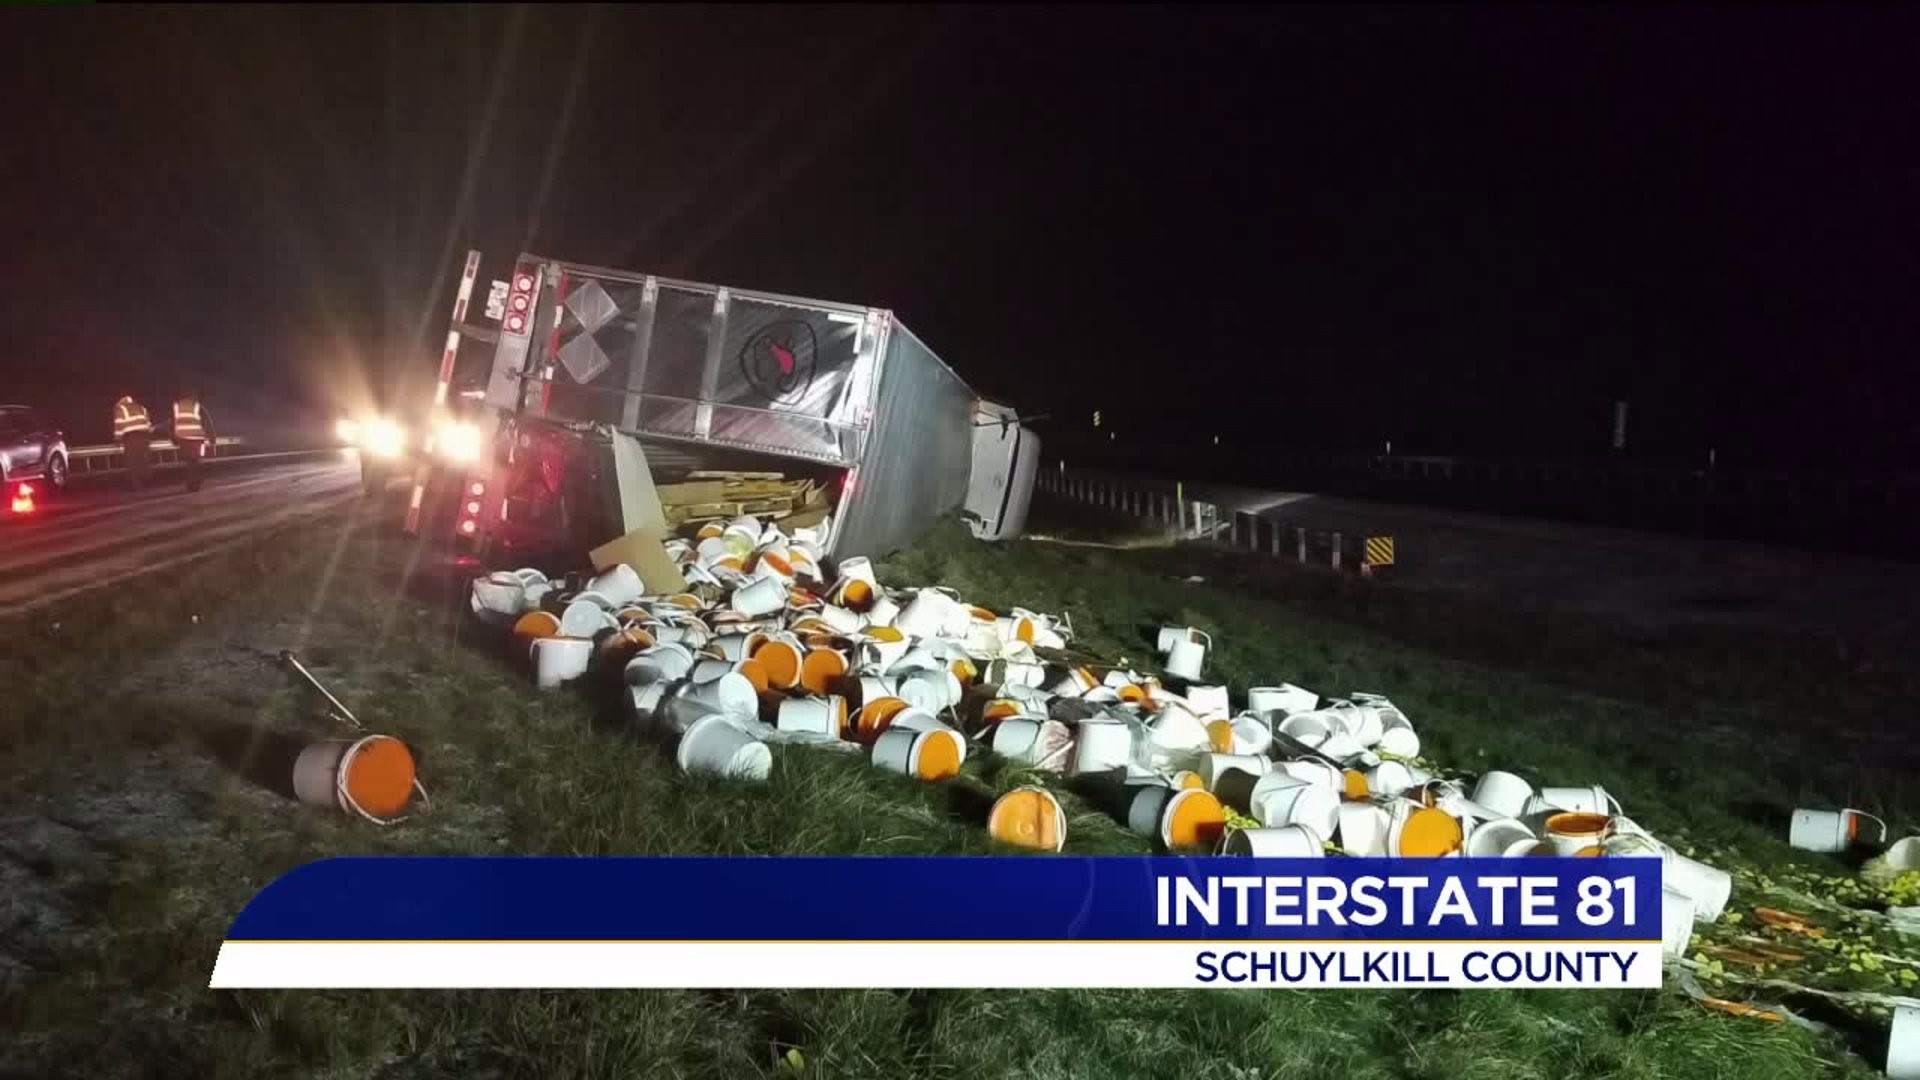 Wet, Snowy Weather Causes Crash on Interstate 81 in Schuylkill County